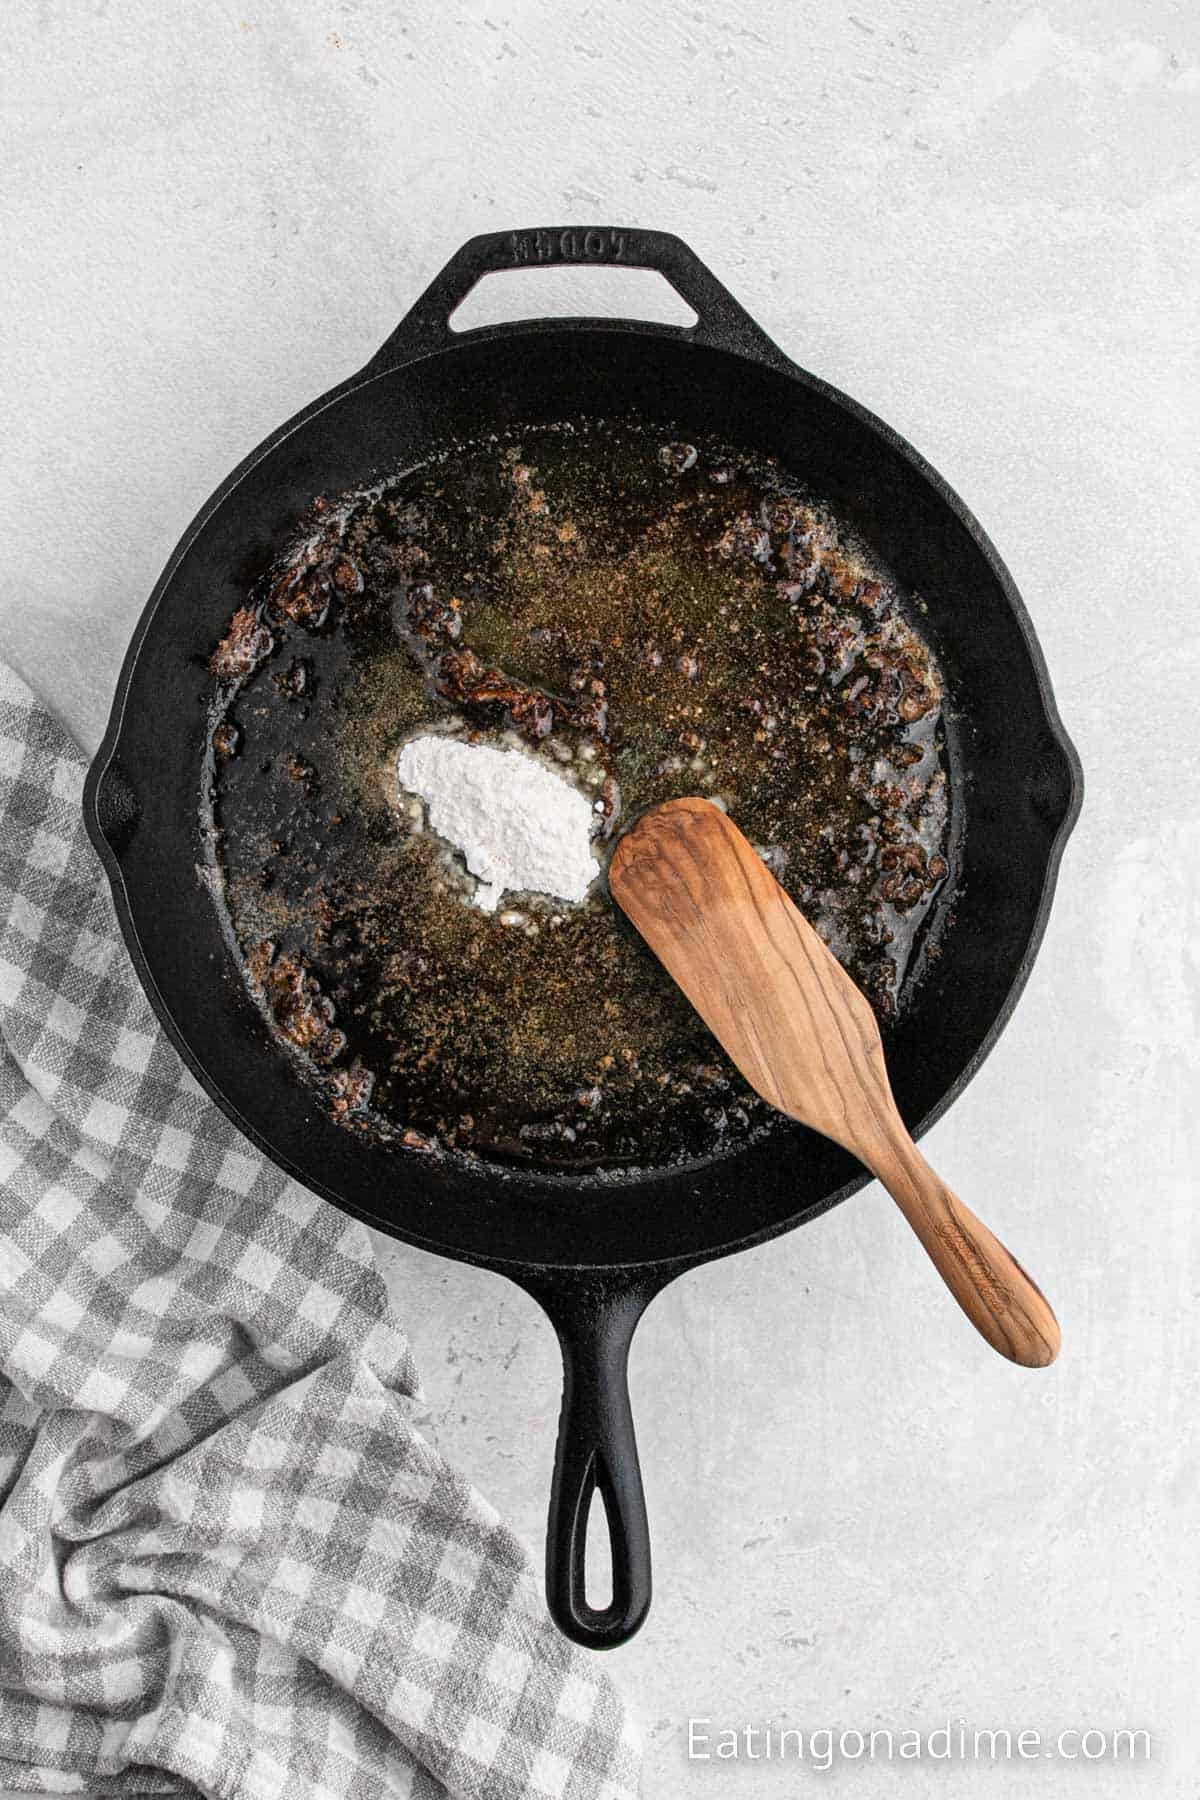 Adding flour to the skillet with the melted butter